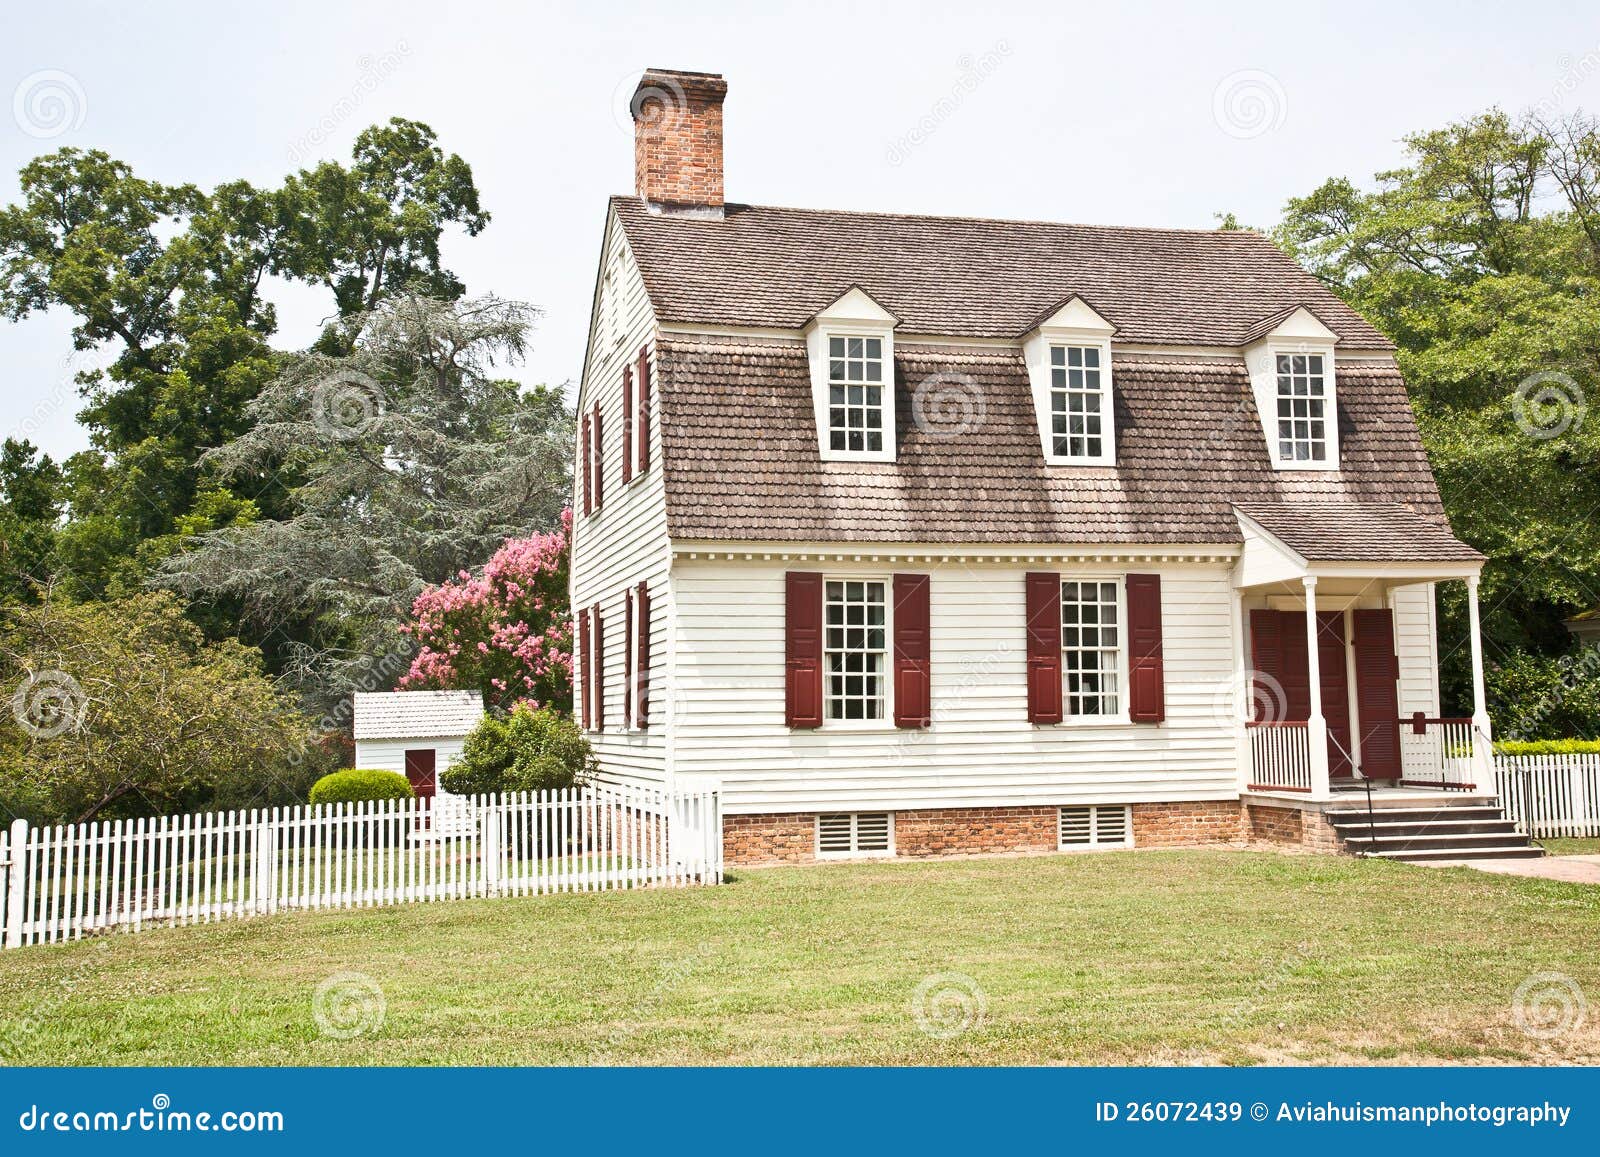 colonial american home